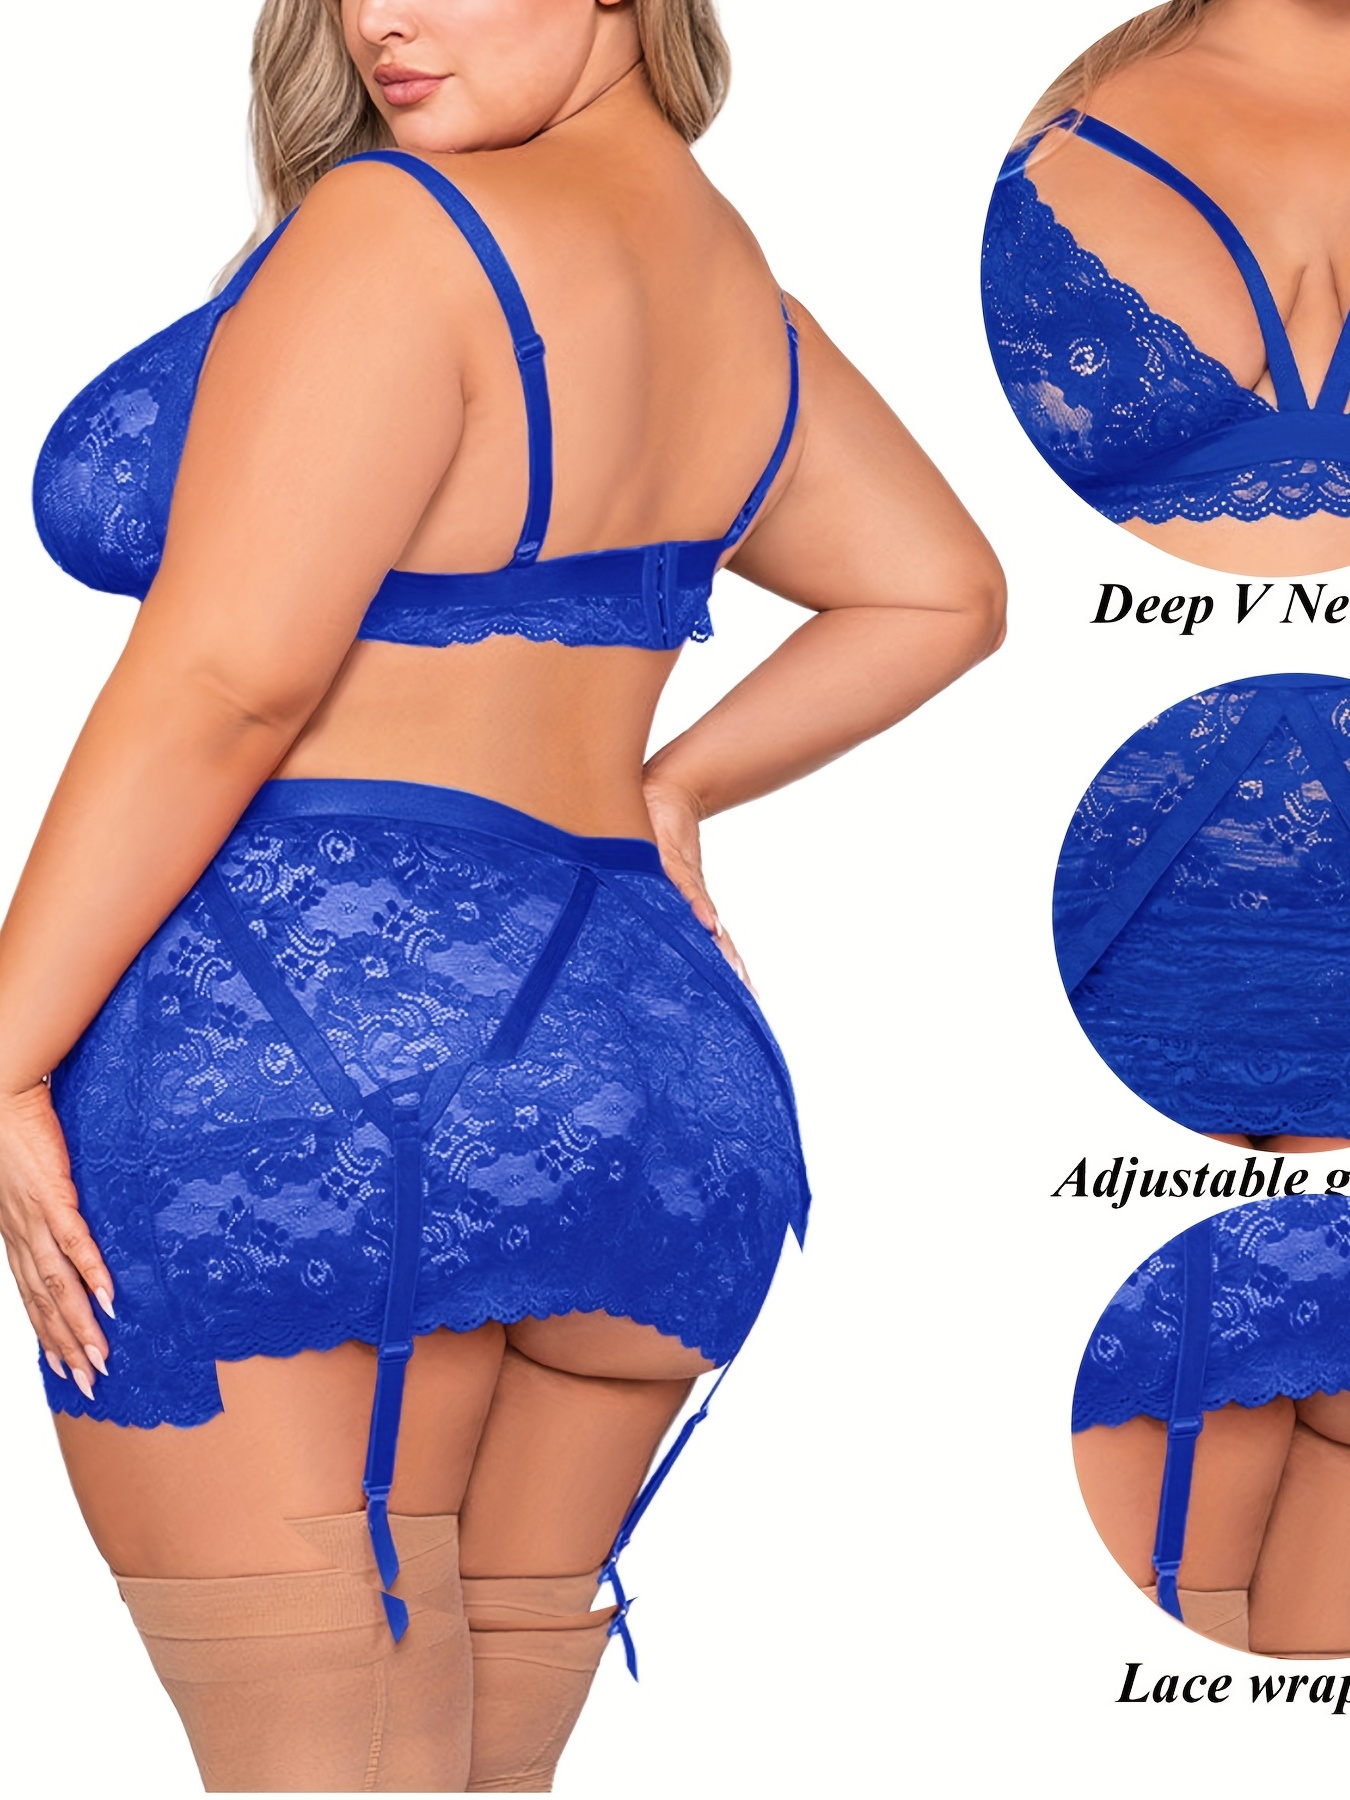 Plus Size Lace Bra Set, Sexy Deep V Corset Lingerie, Seamless Thong Lace Bra  Set For Women From Yanqin03, $18.14